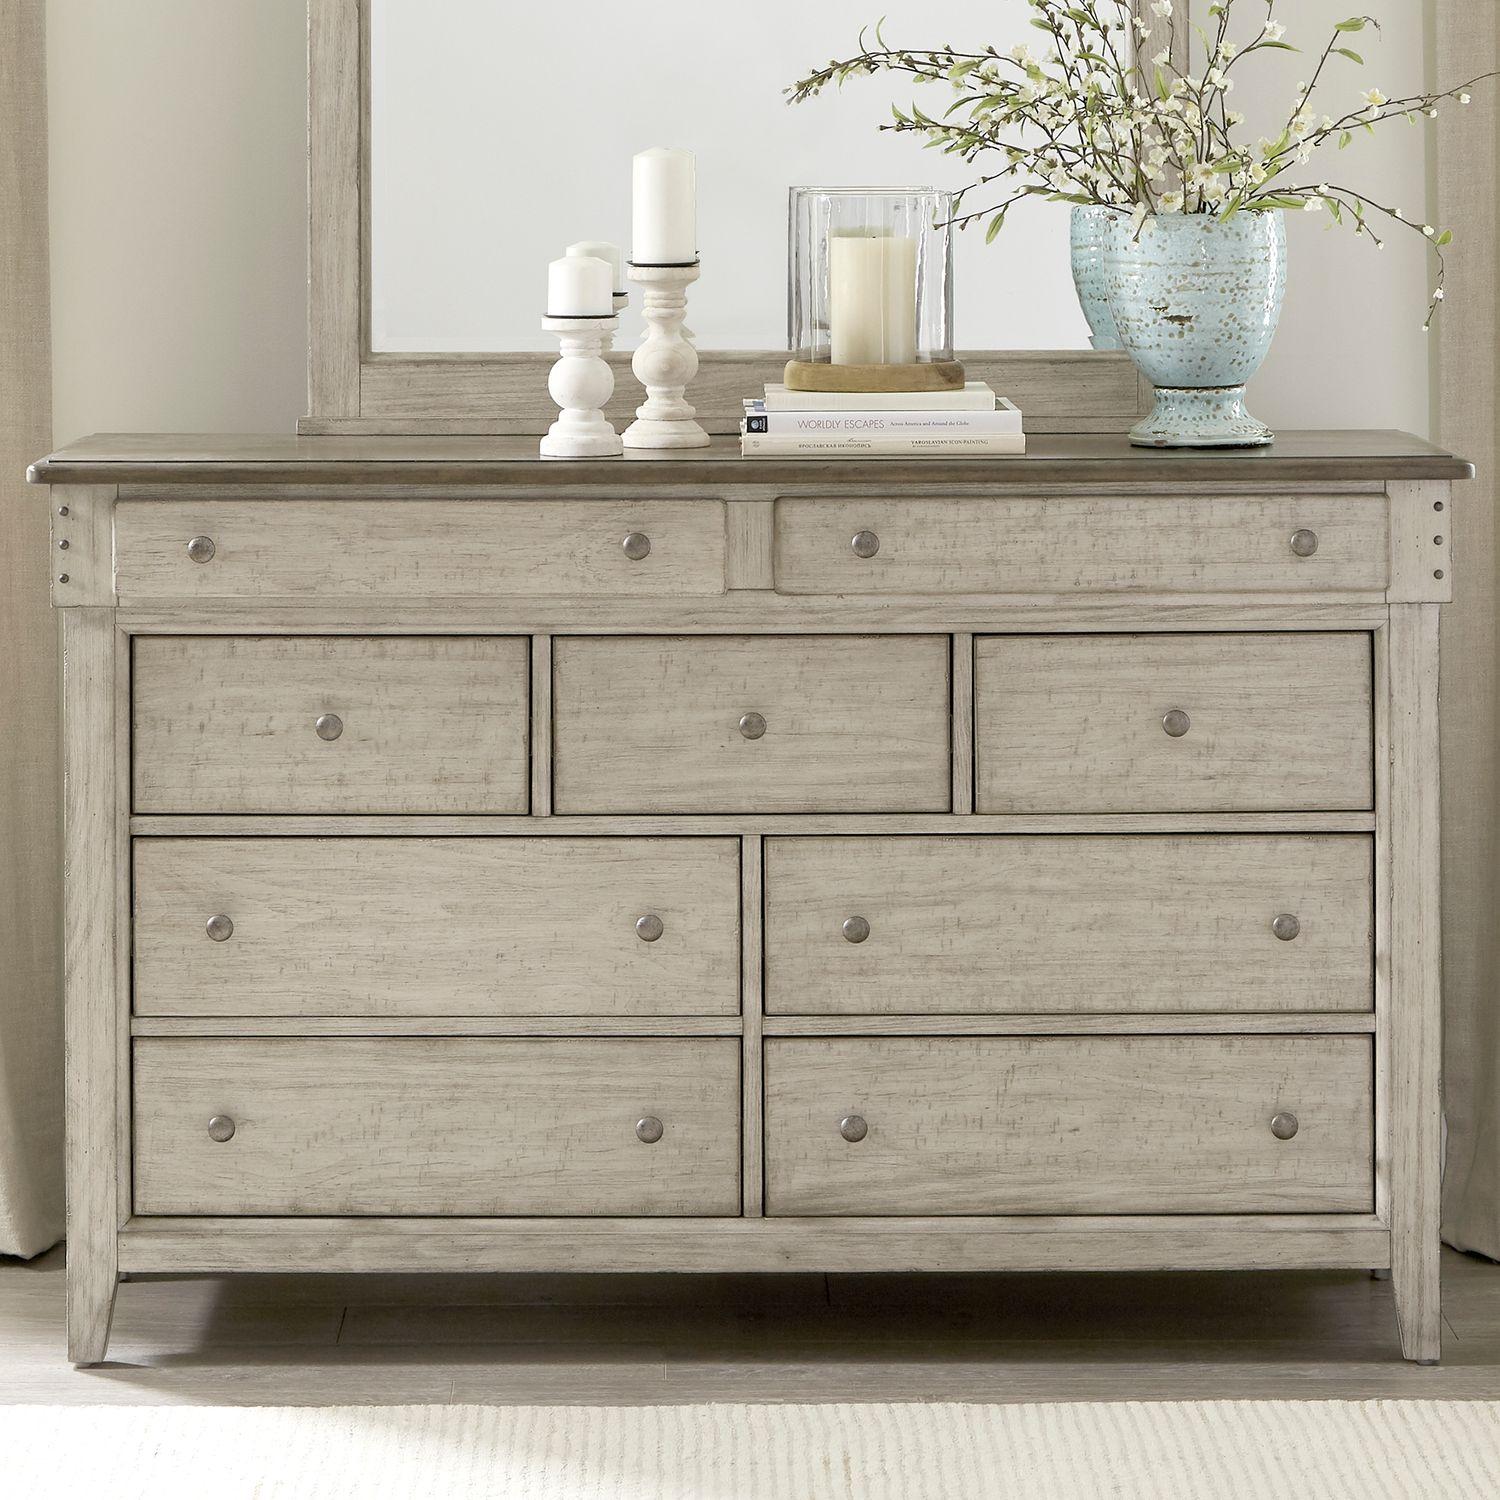 Contemporary, Cottage Dresser Ivy Hollow (457-BR) 457-BR31 in Taupe 